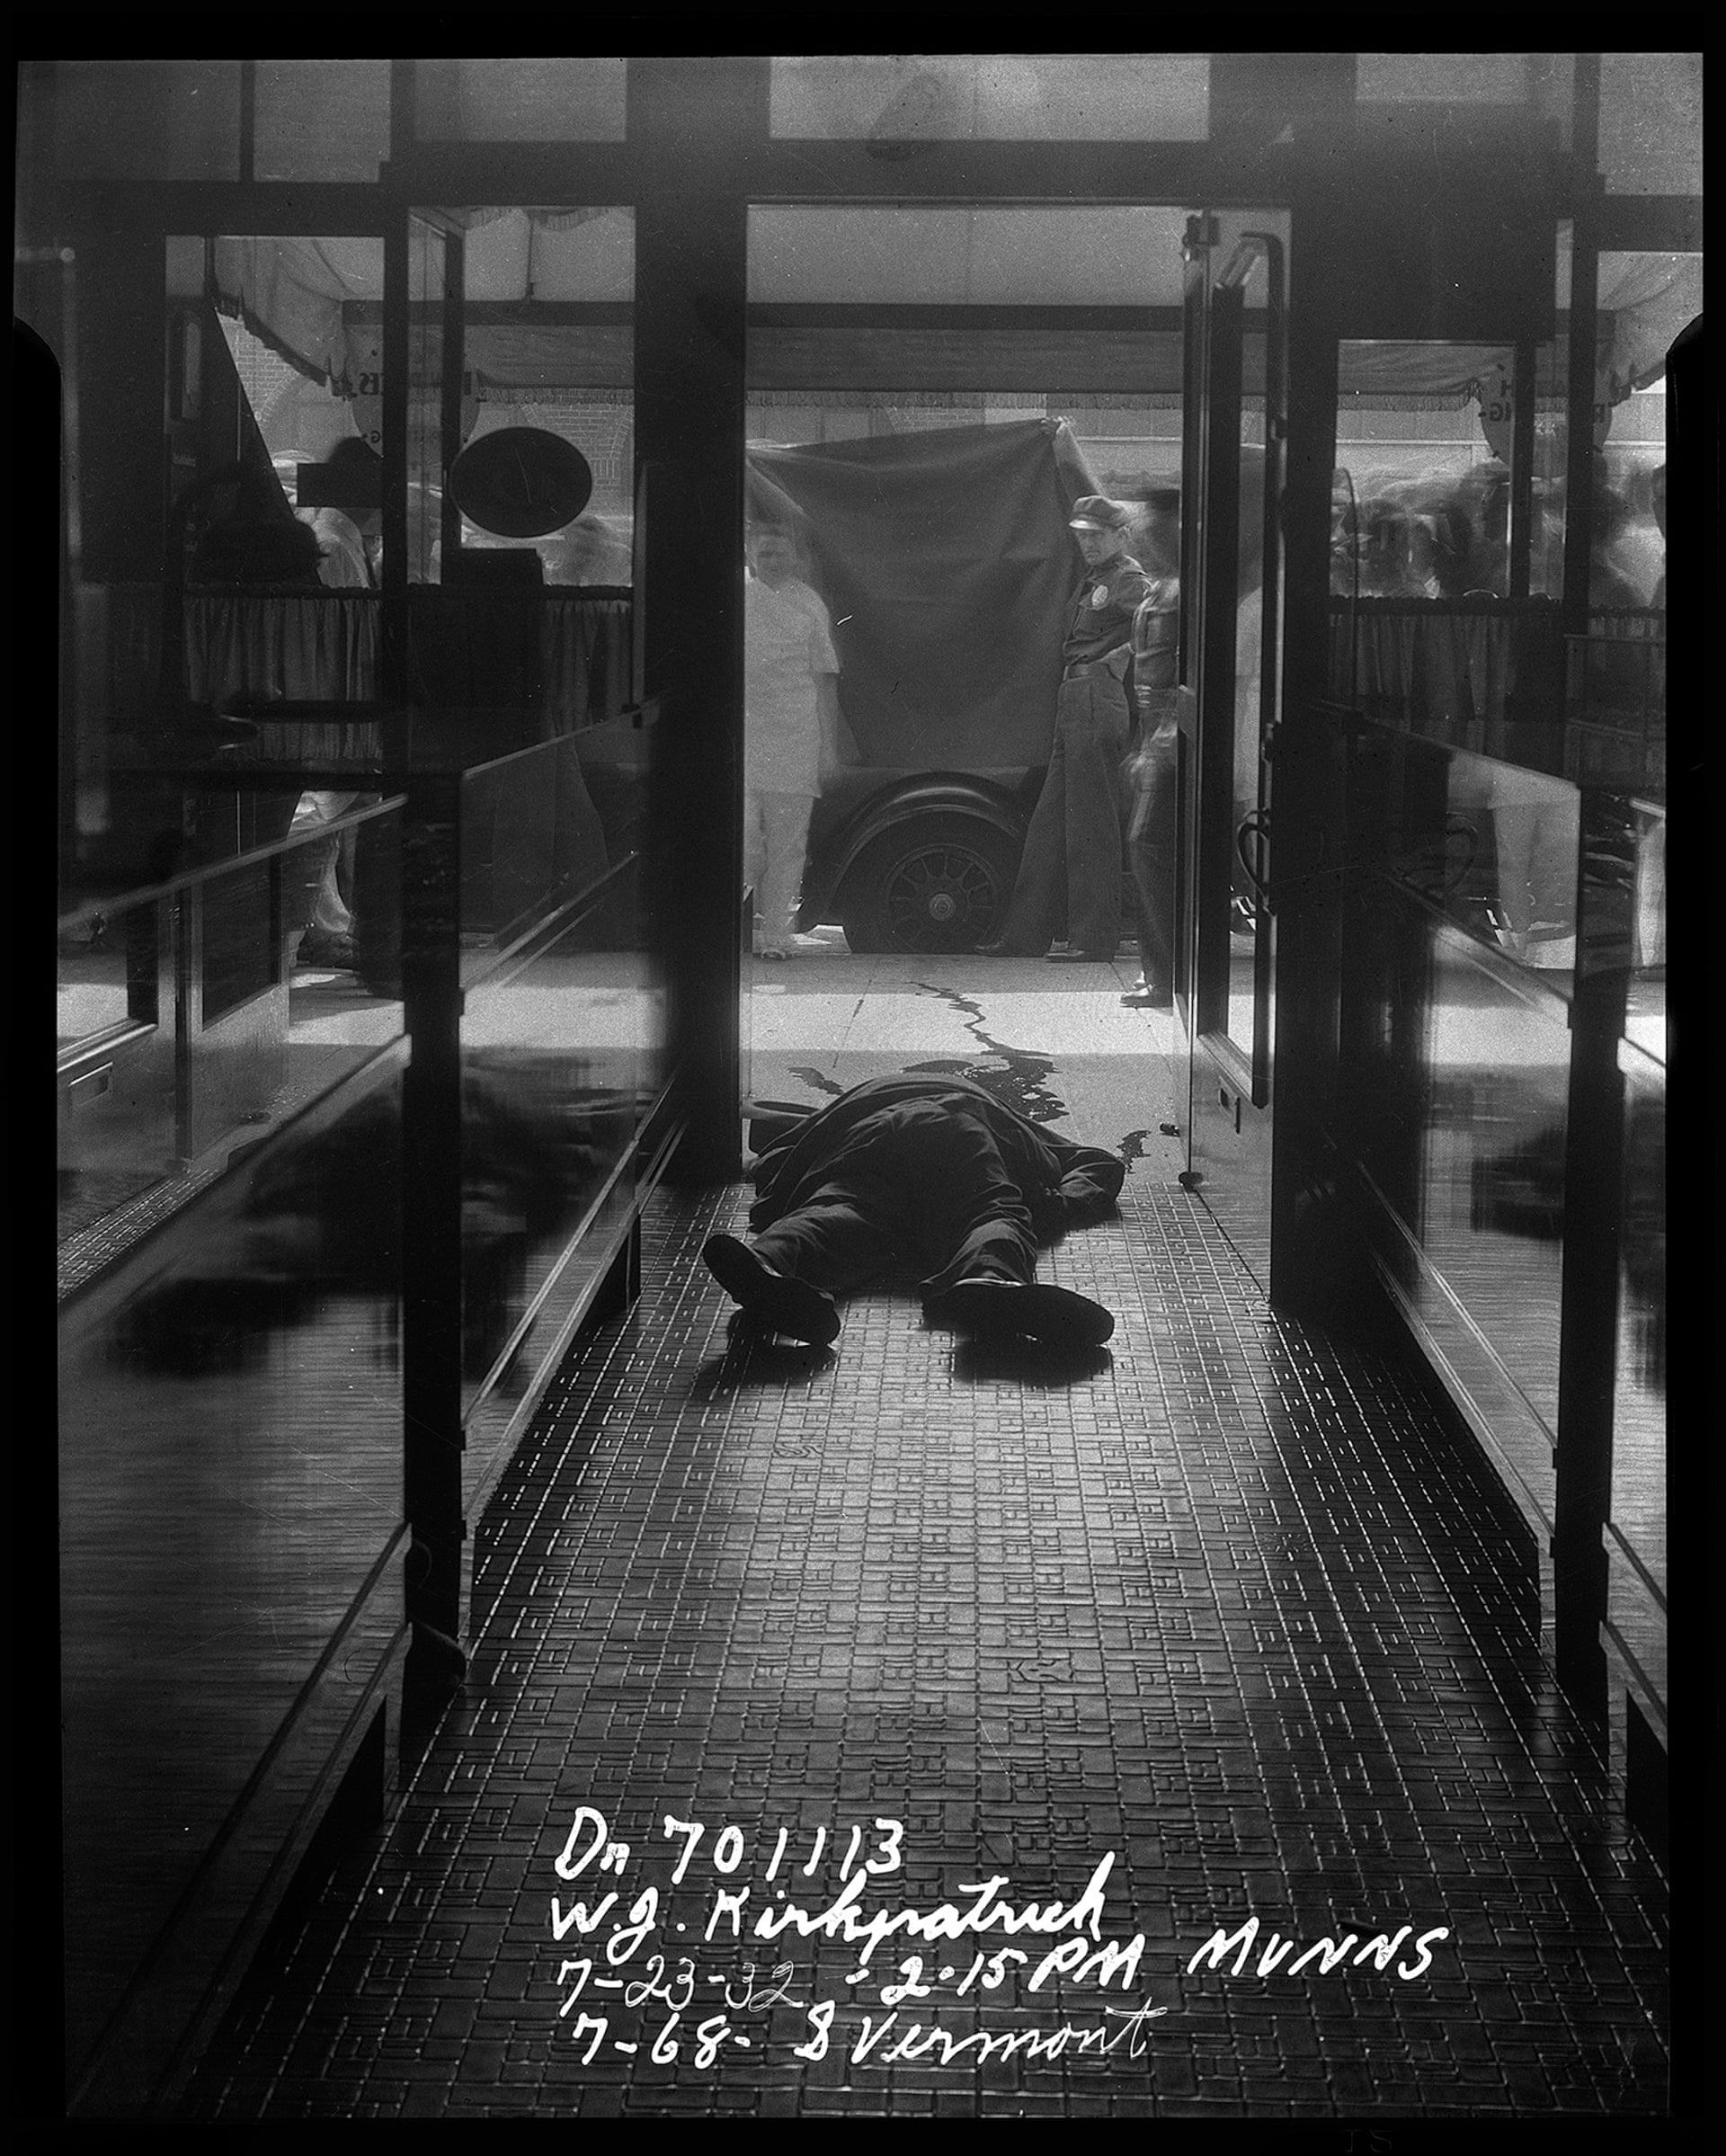 A jewellery store robbery that resulted in the death of a bystander. Los Angeles, Ca, July 23, 1932 [1441x1800]